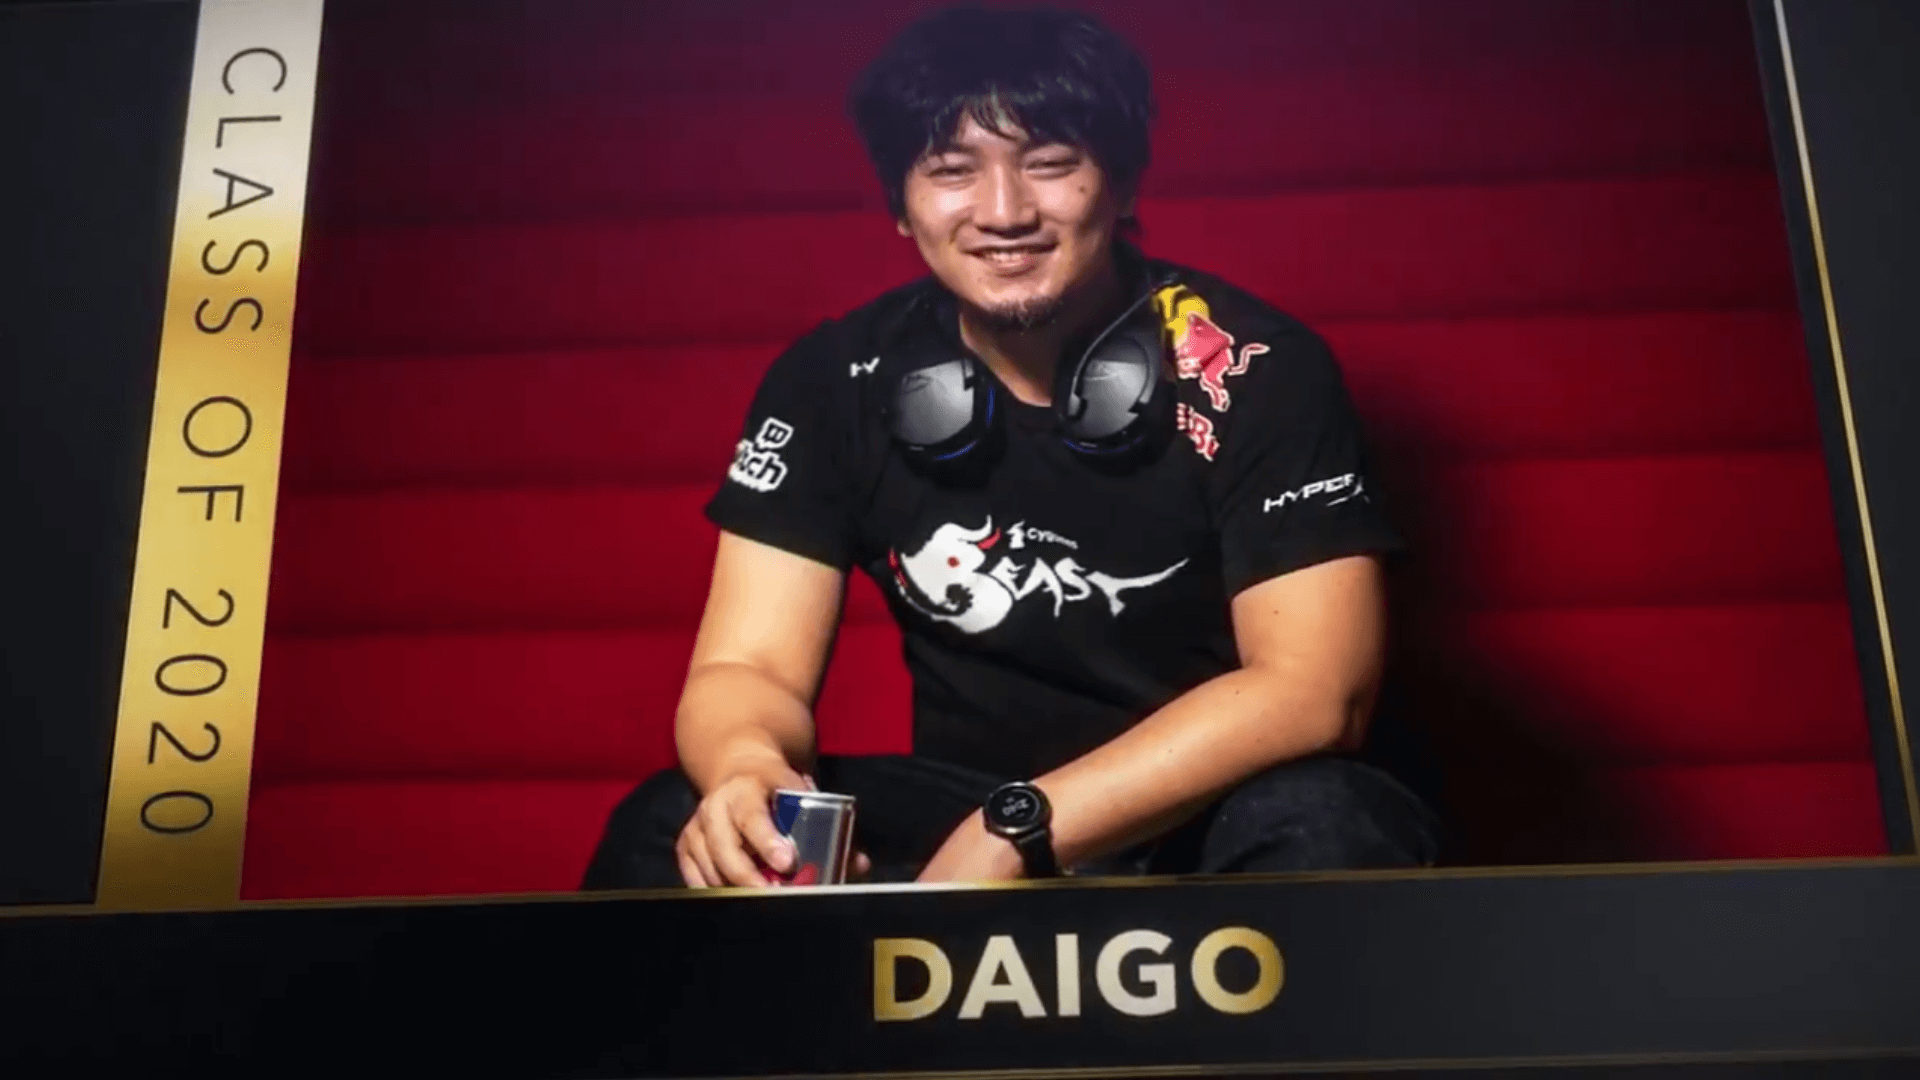 Daigo is the First Inductee to Esports Awards Lifetime Achievement